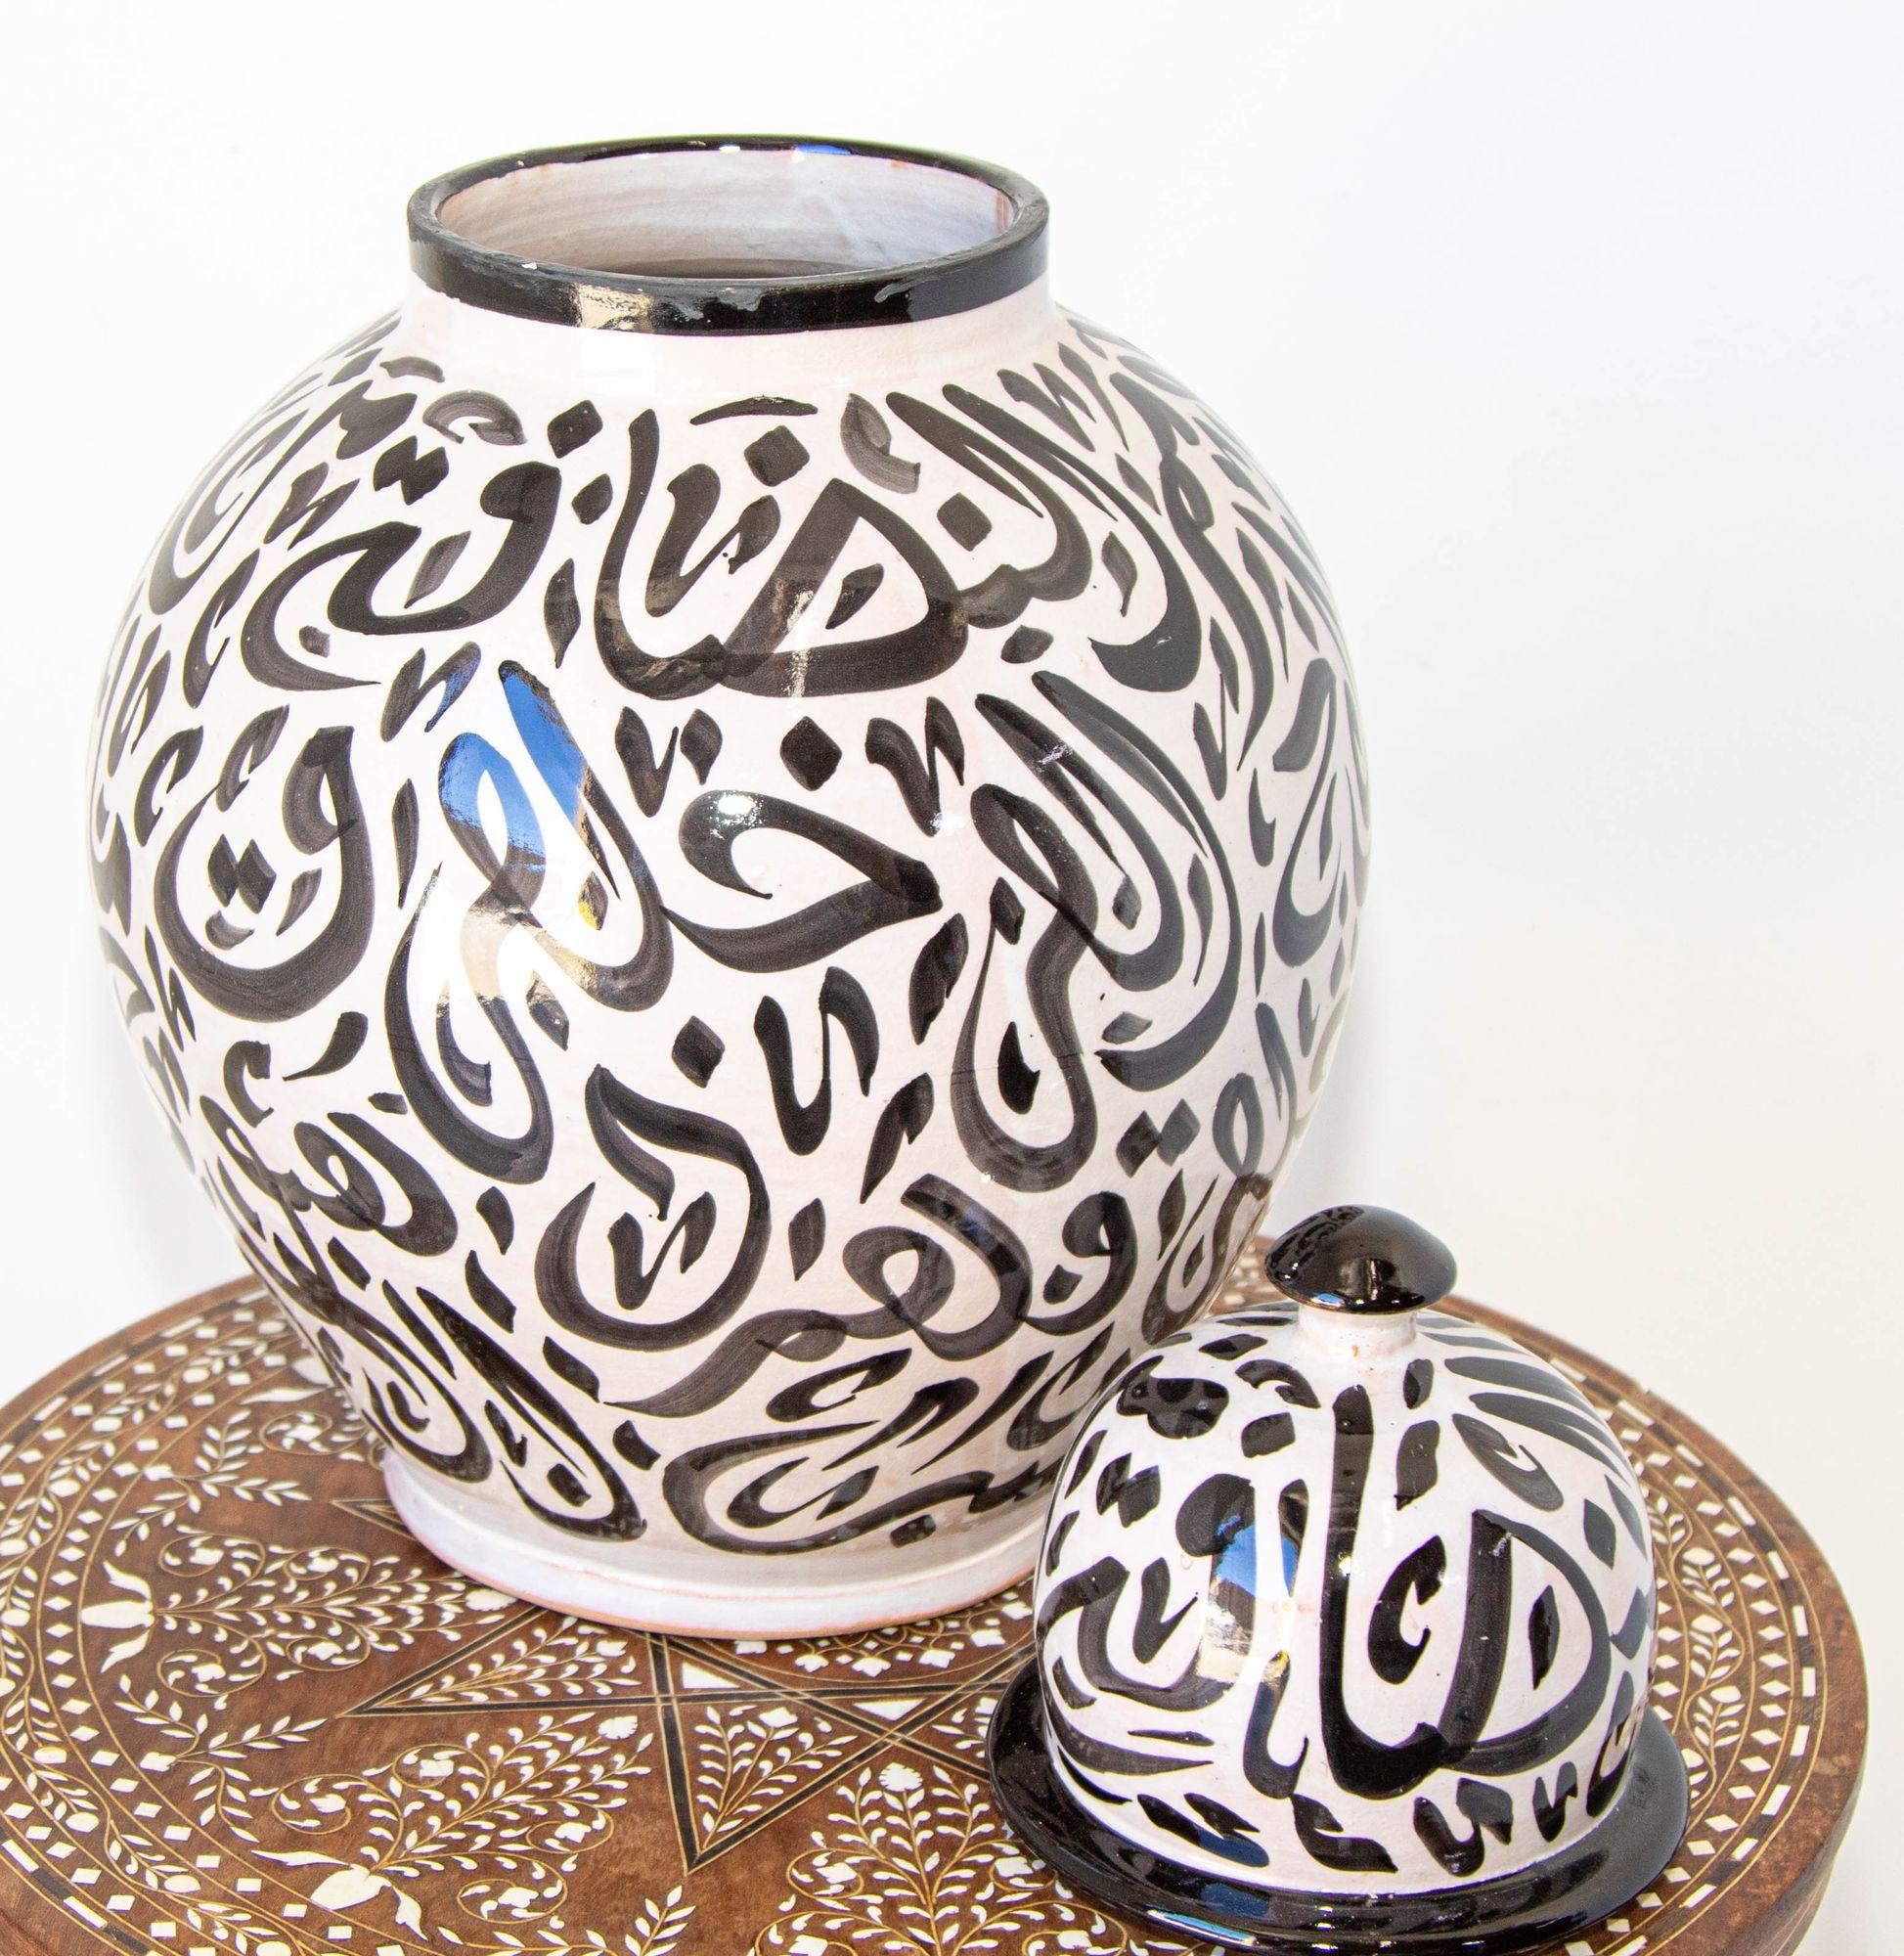 Moroccan Ceramic Lidded Urn with Arabic Calligraphy Black Writing, Fez For Sale 3